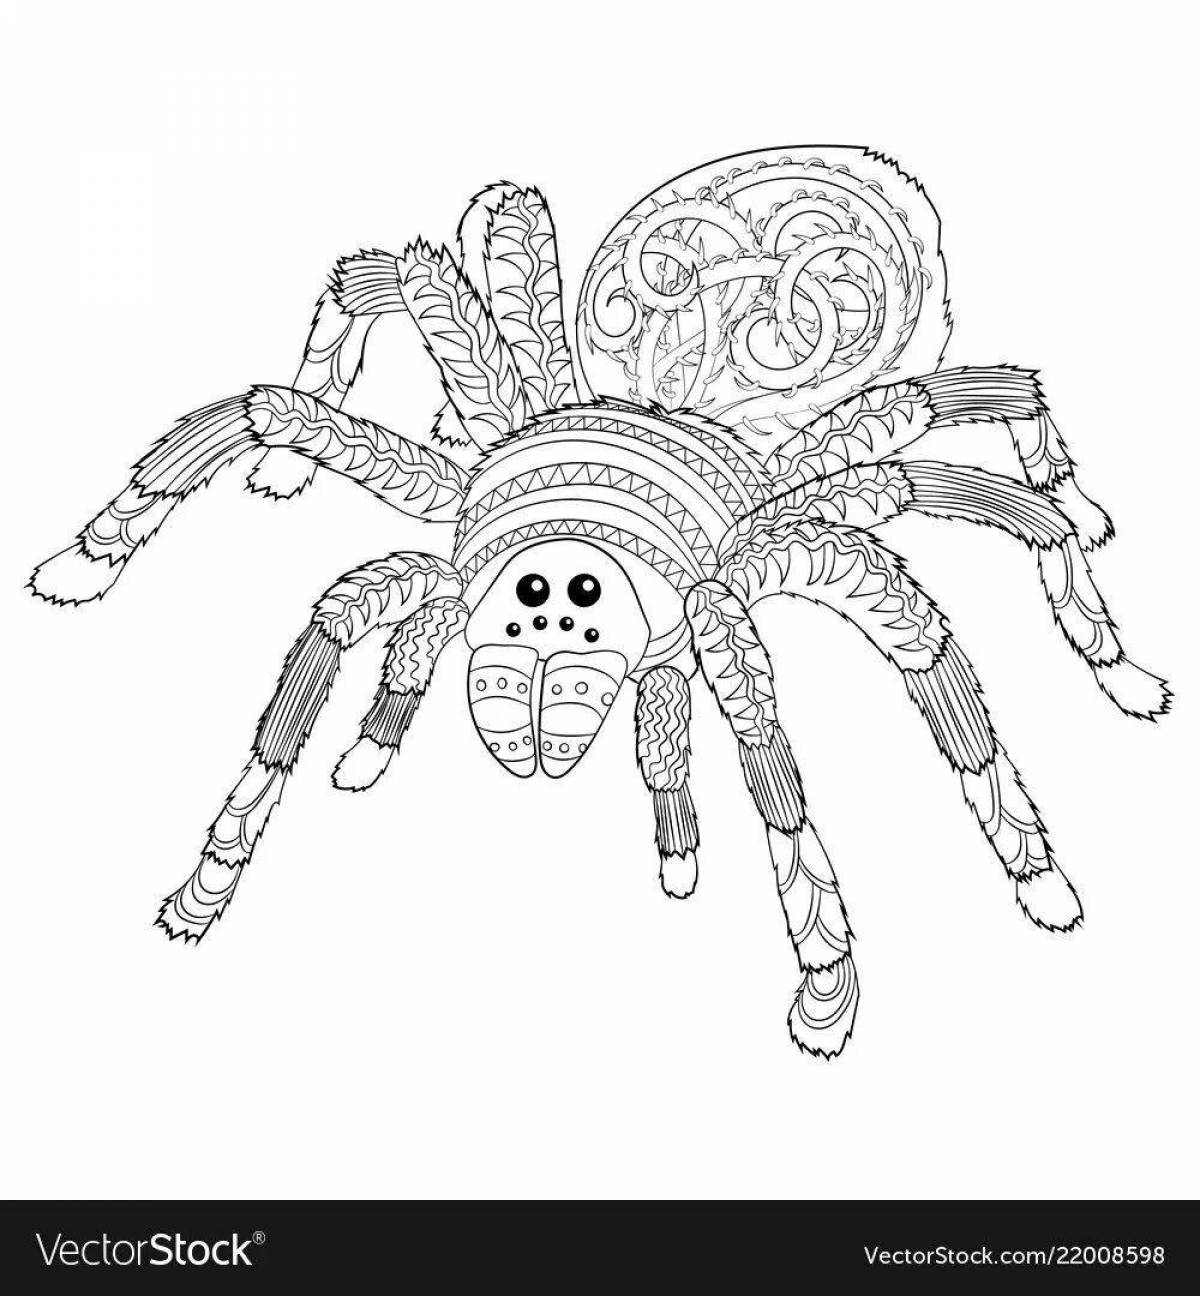 Coloring page amazing spider